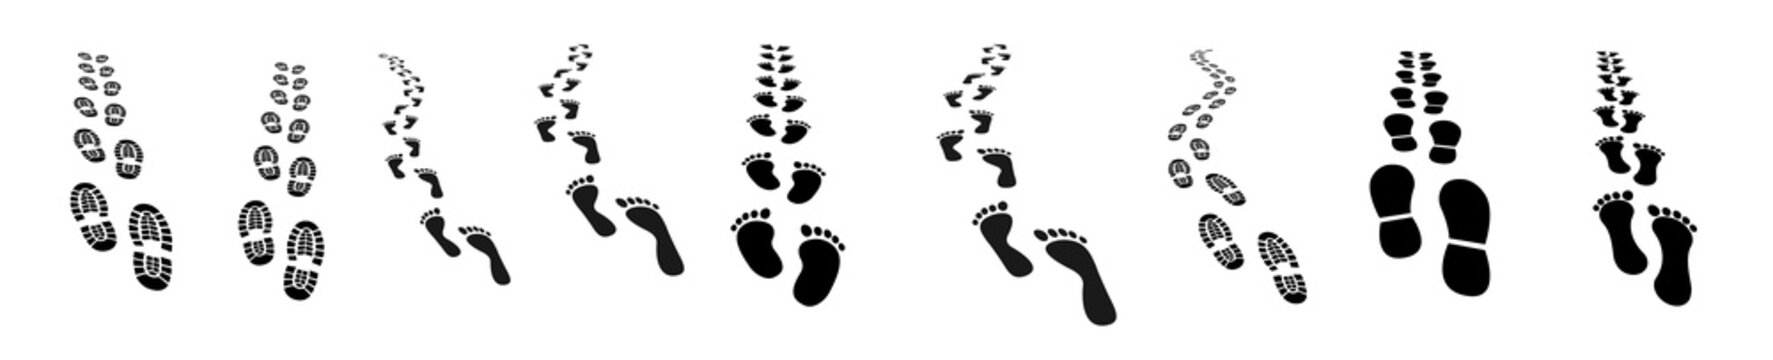 Foot trail set vector icon